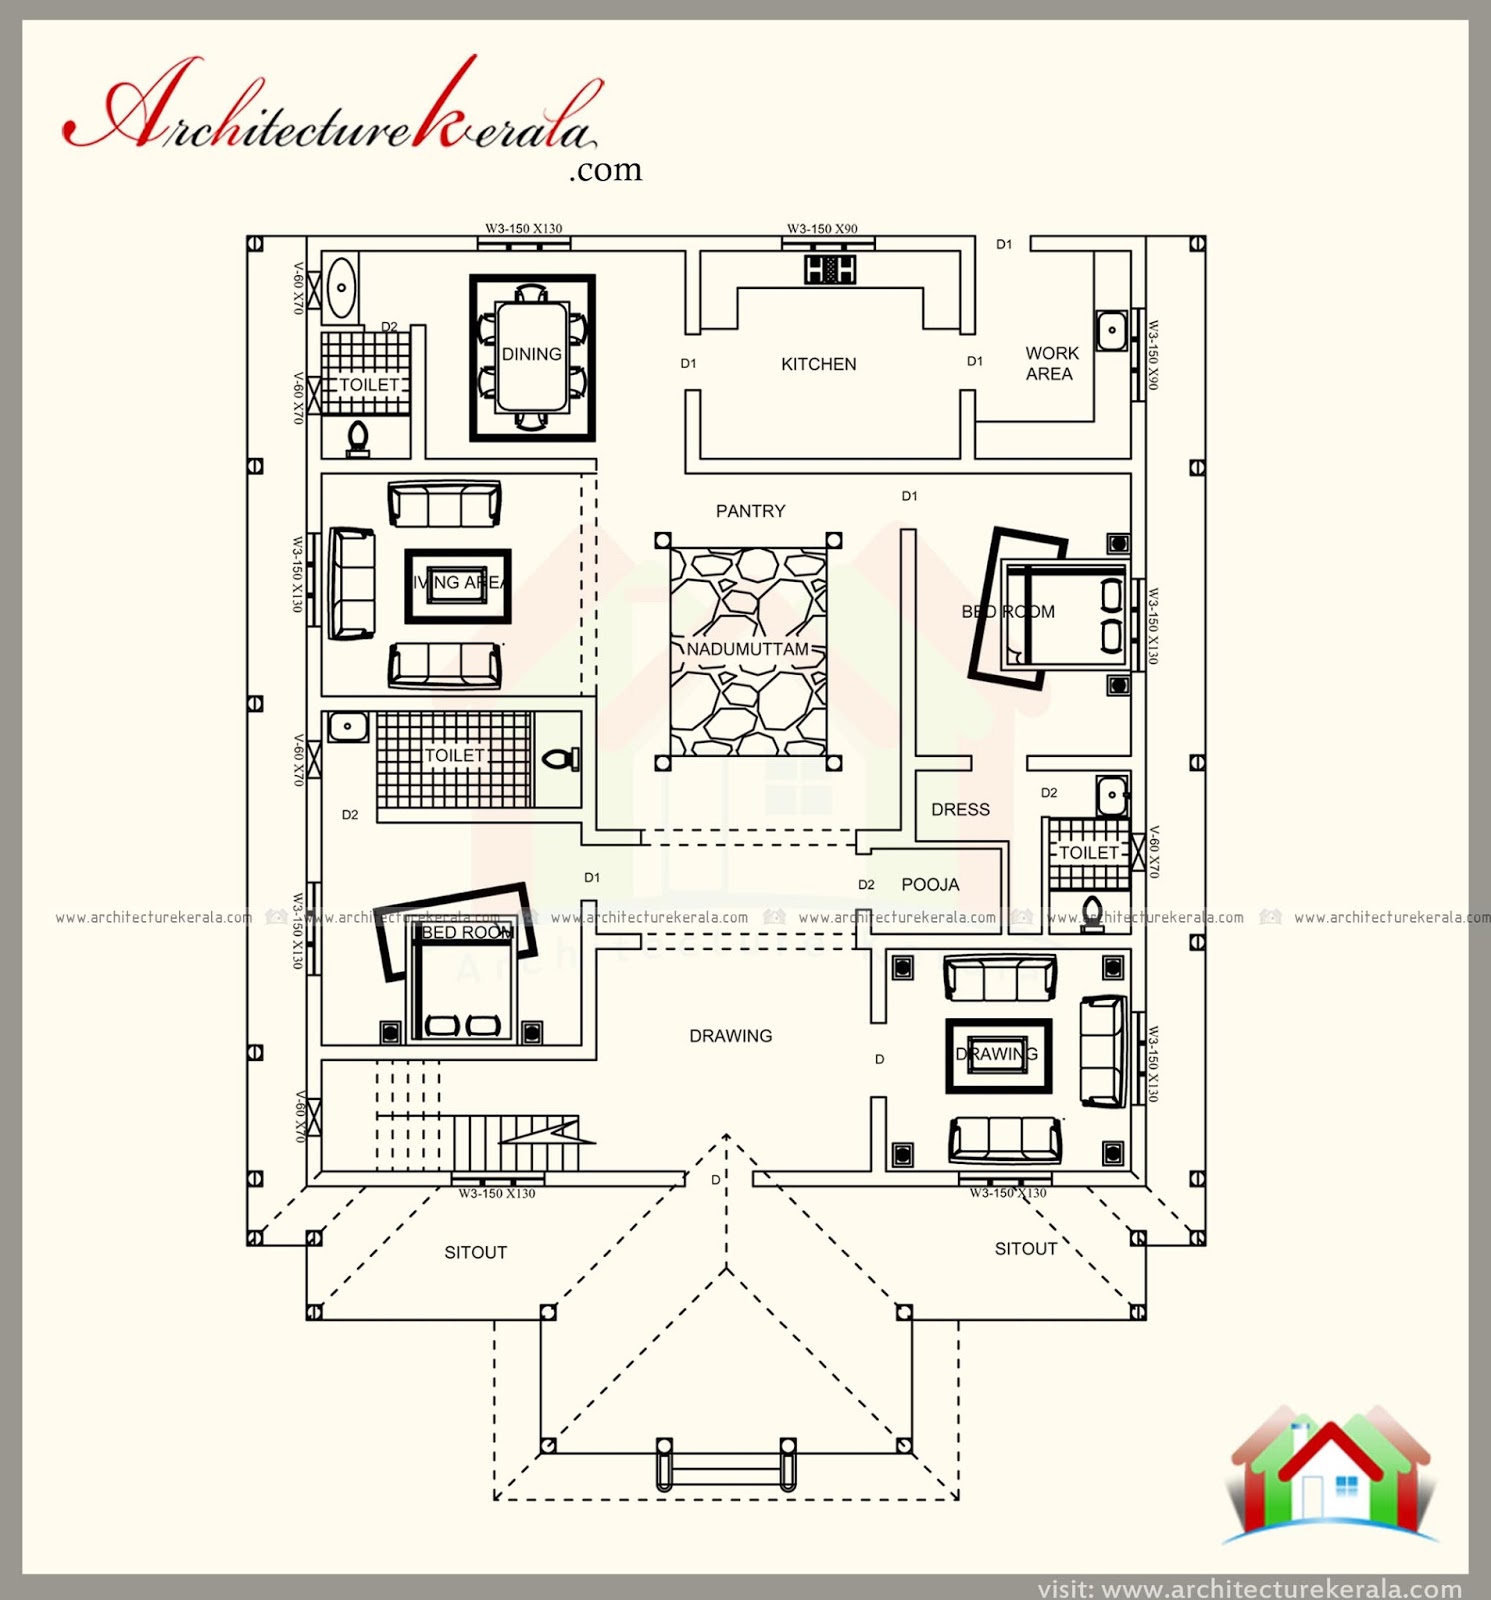 Traditional Kerala House Plan And Elevation 2165 Sq Ft - Bank2home.com